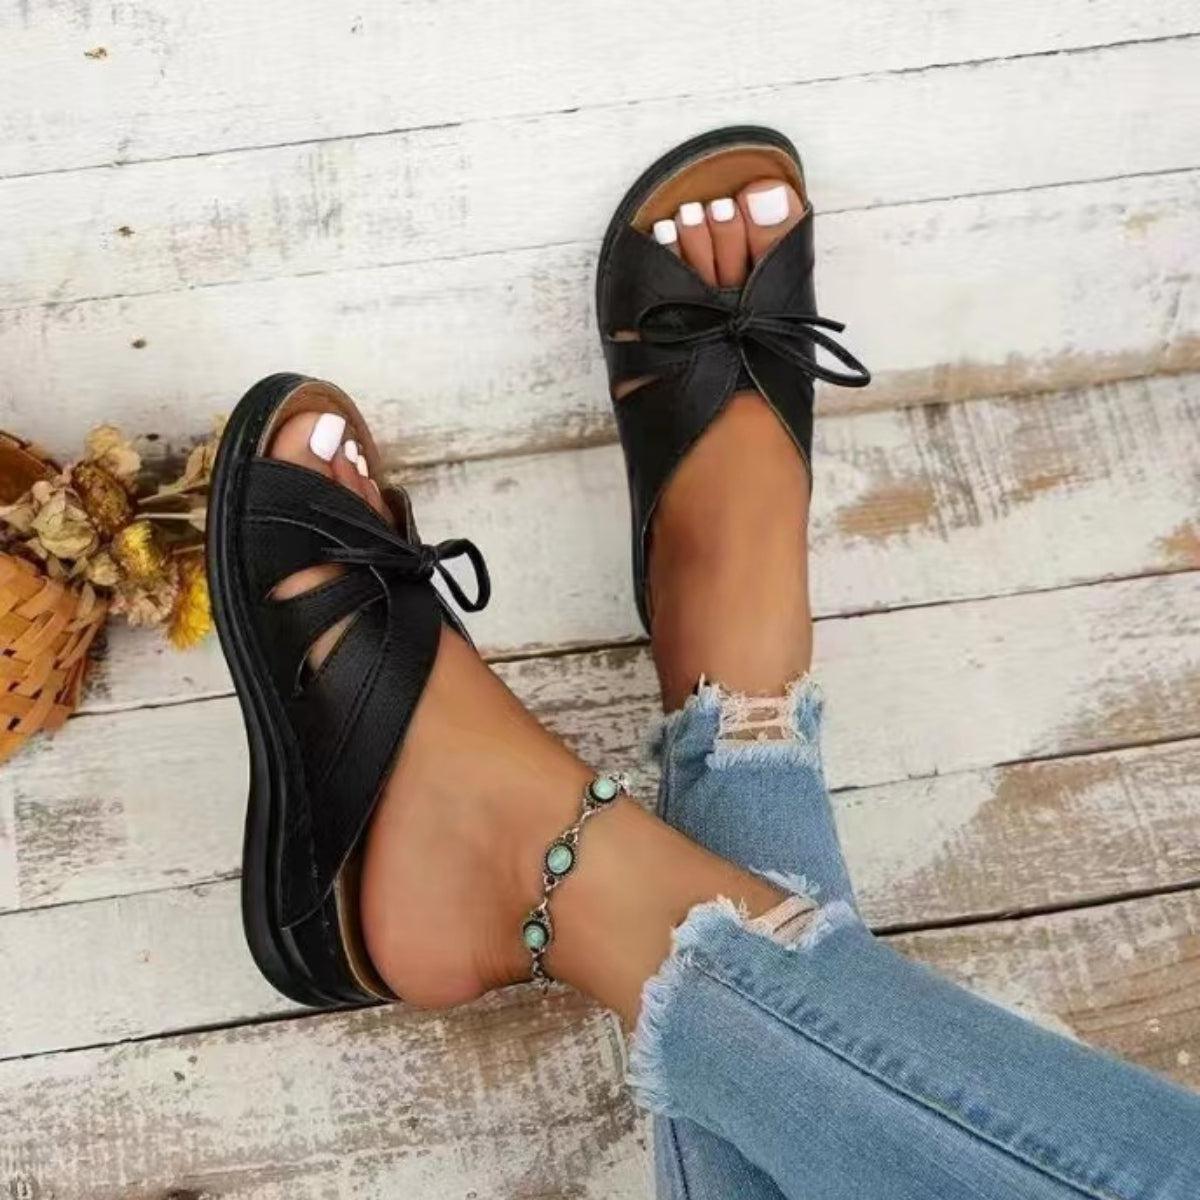 a woman's feet wearing black sandals and jeans